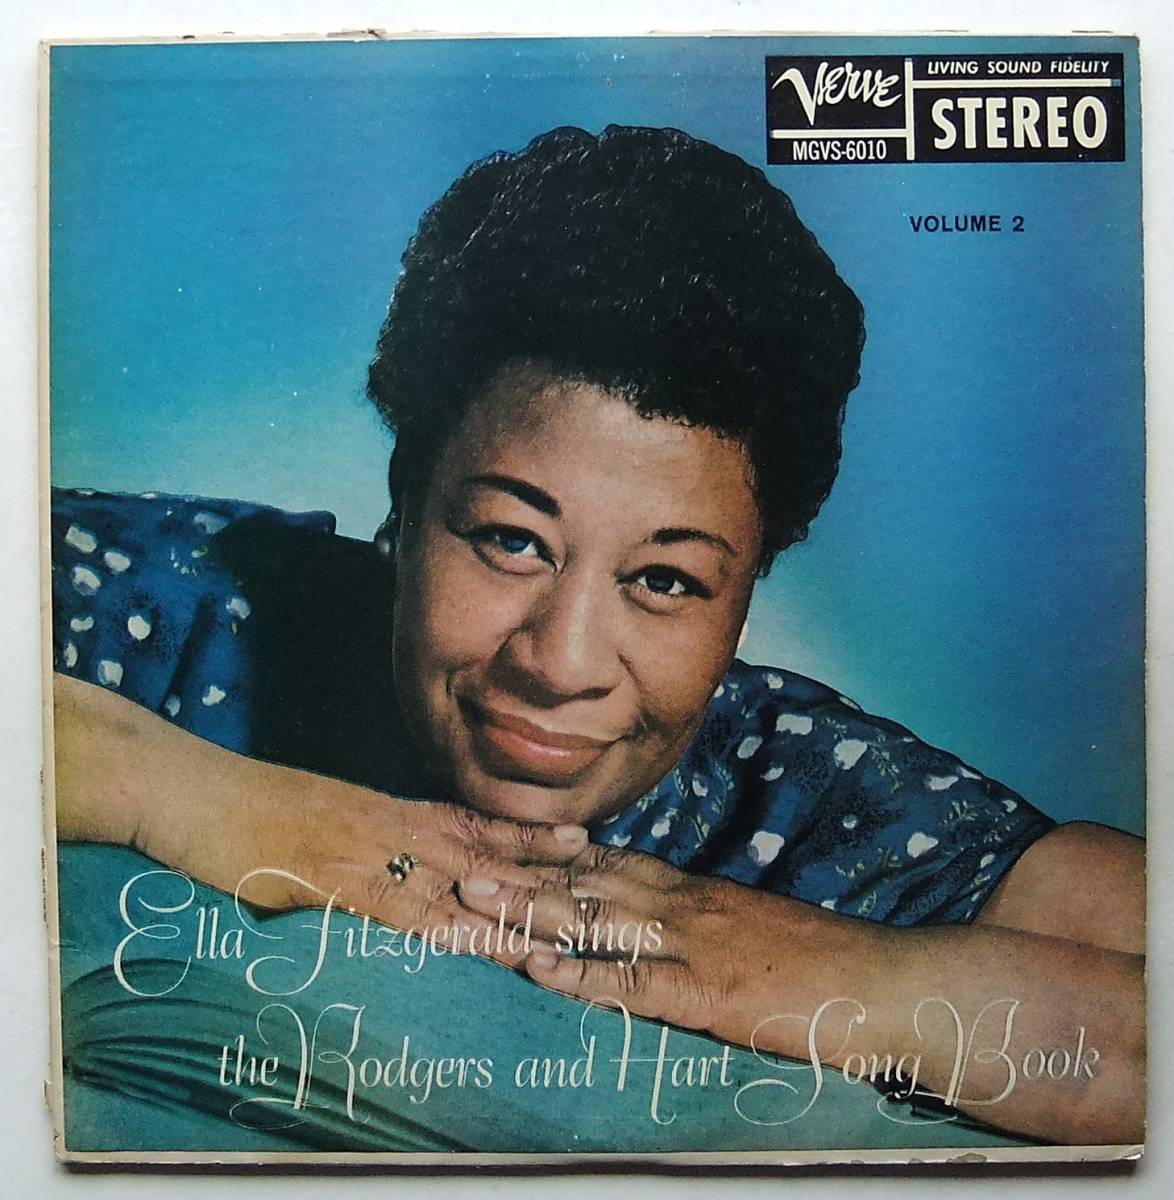 ◆ ELLA FITZGERALD / Sings Rodgers and Hart Song Book Volume 2 ◆ Verve MGVS-6010 (VRI:dg) ◆_画像1